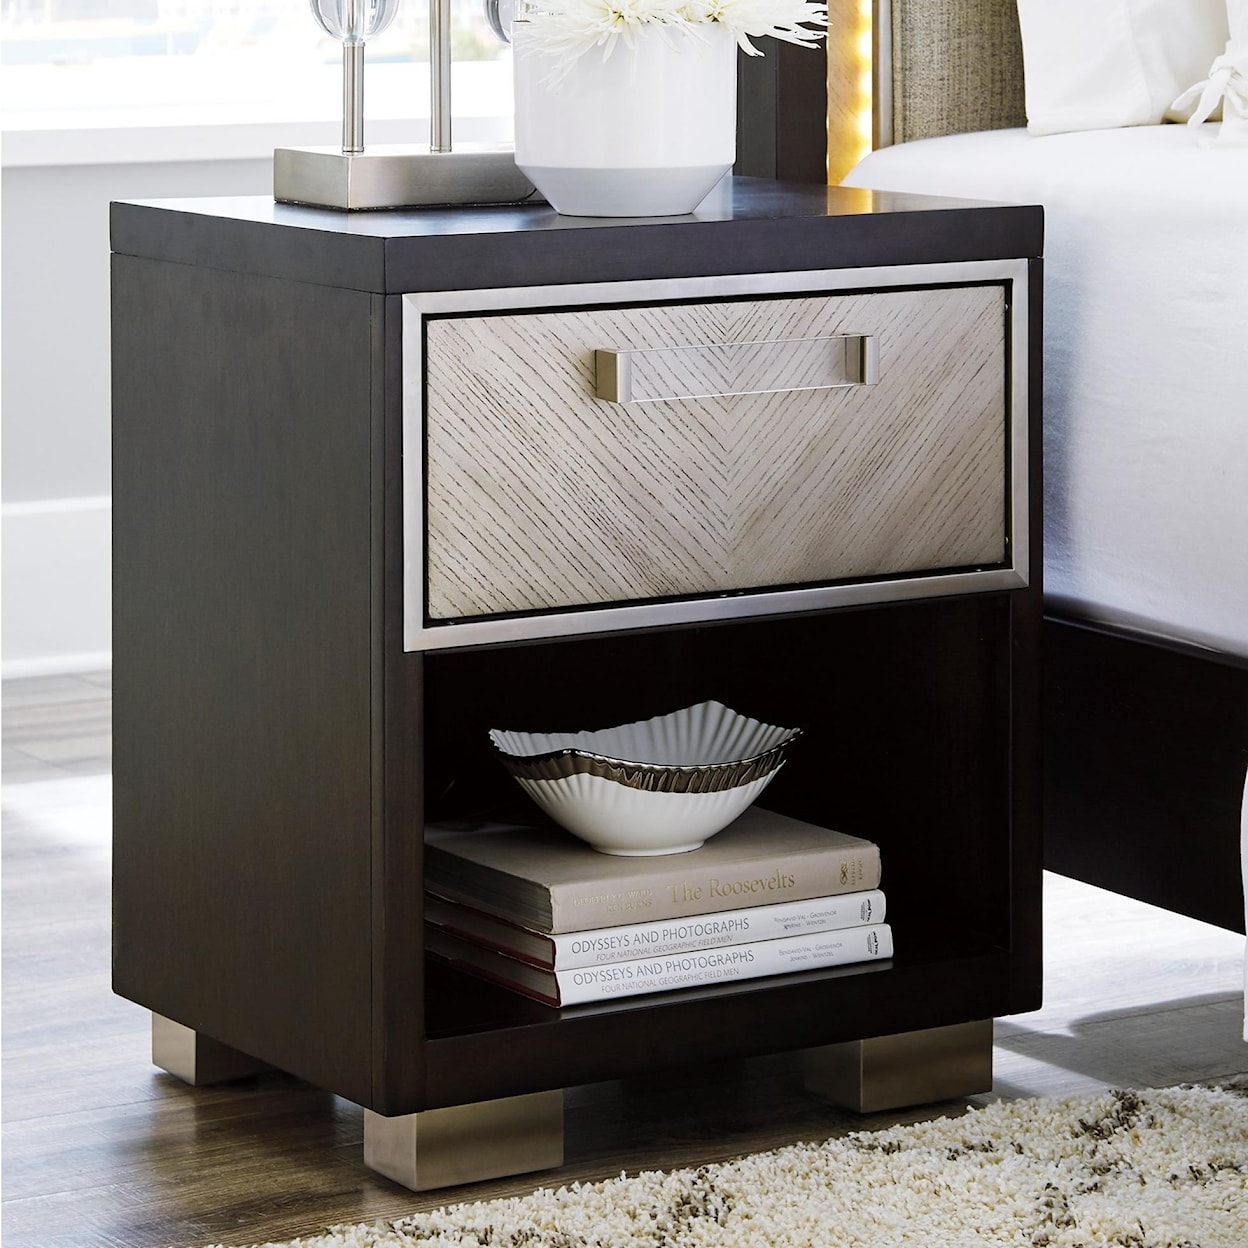 Signature Design by Ashley Maretto One Drawer Nightstand